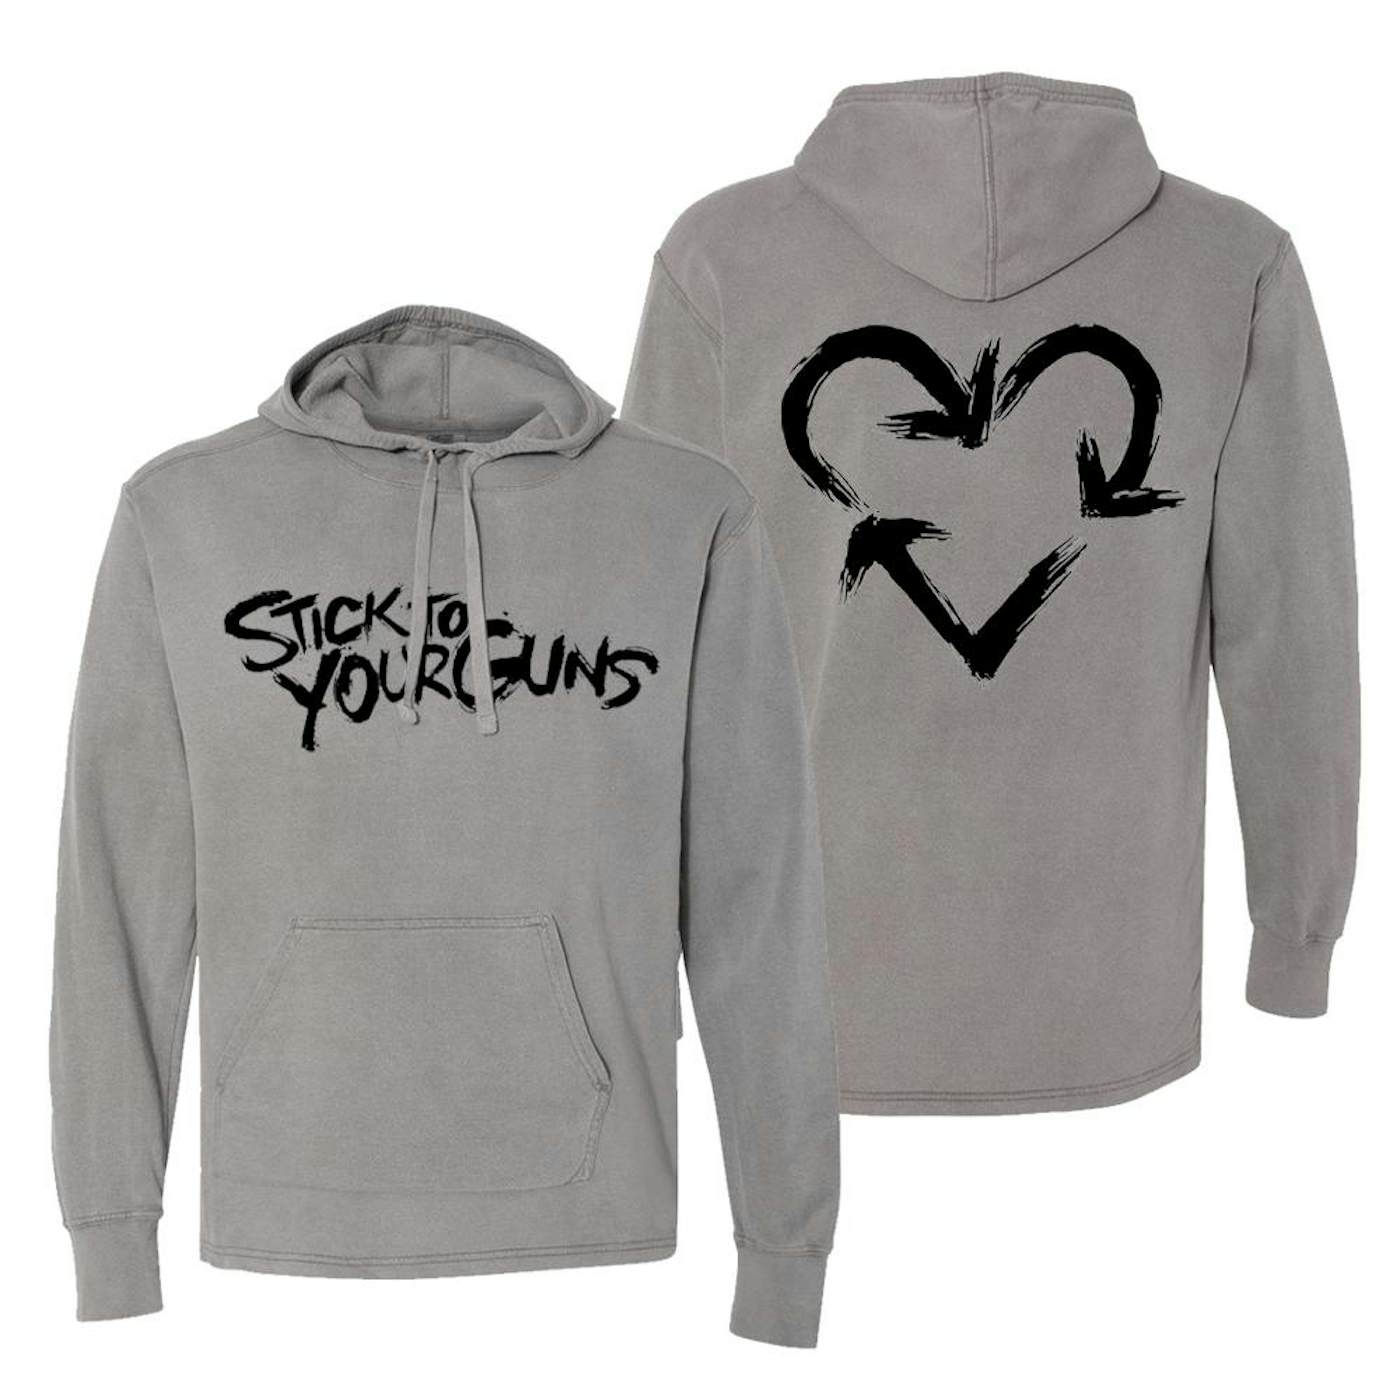 Stick To Your Guns - The Hope Division Hoodie (Grey)